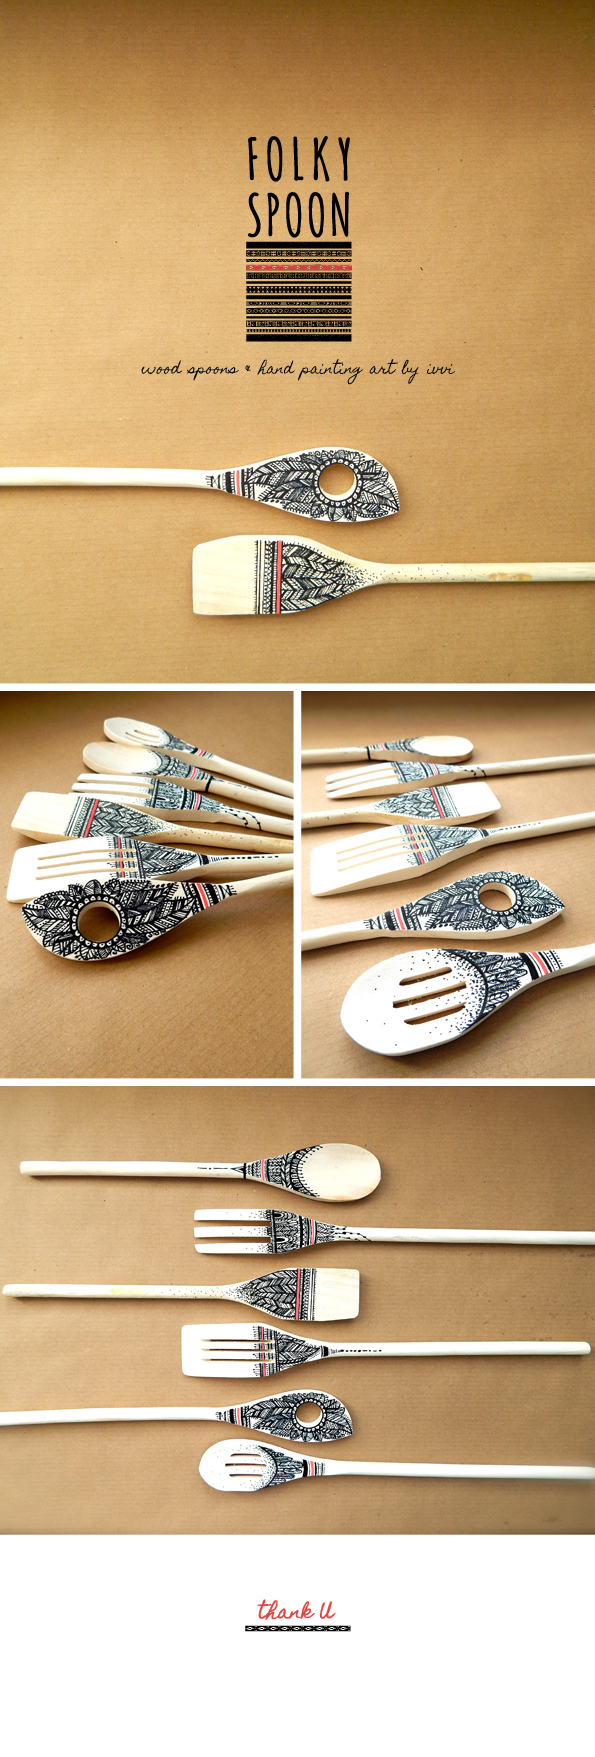 Folky spoon ~ wood spoons & hand painting art by ivvi